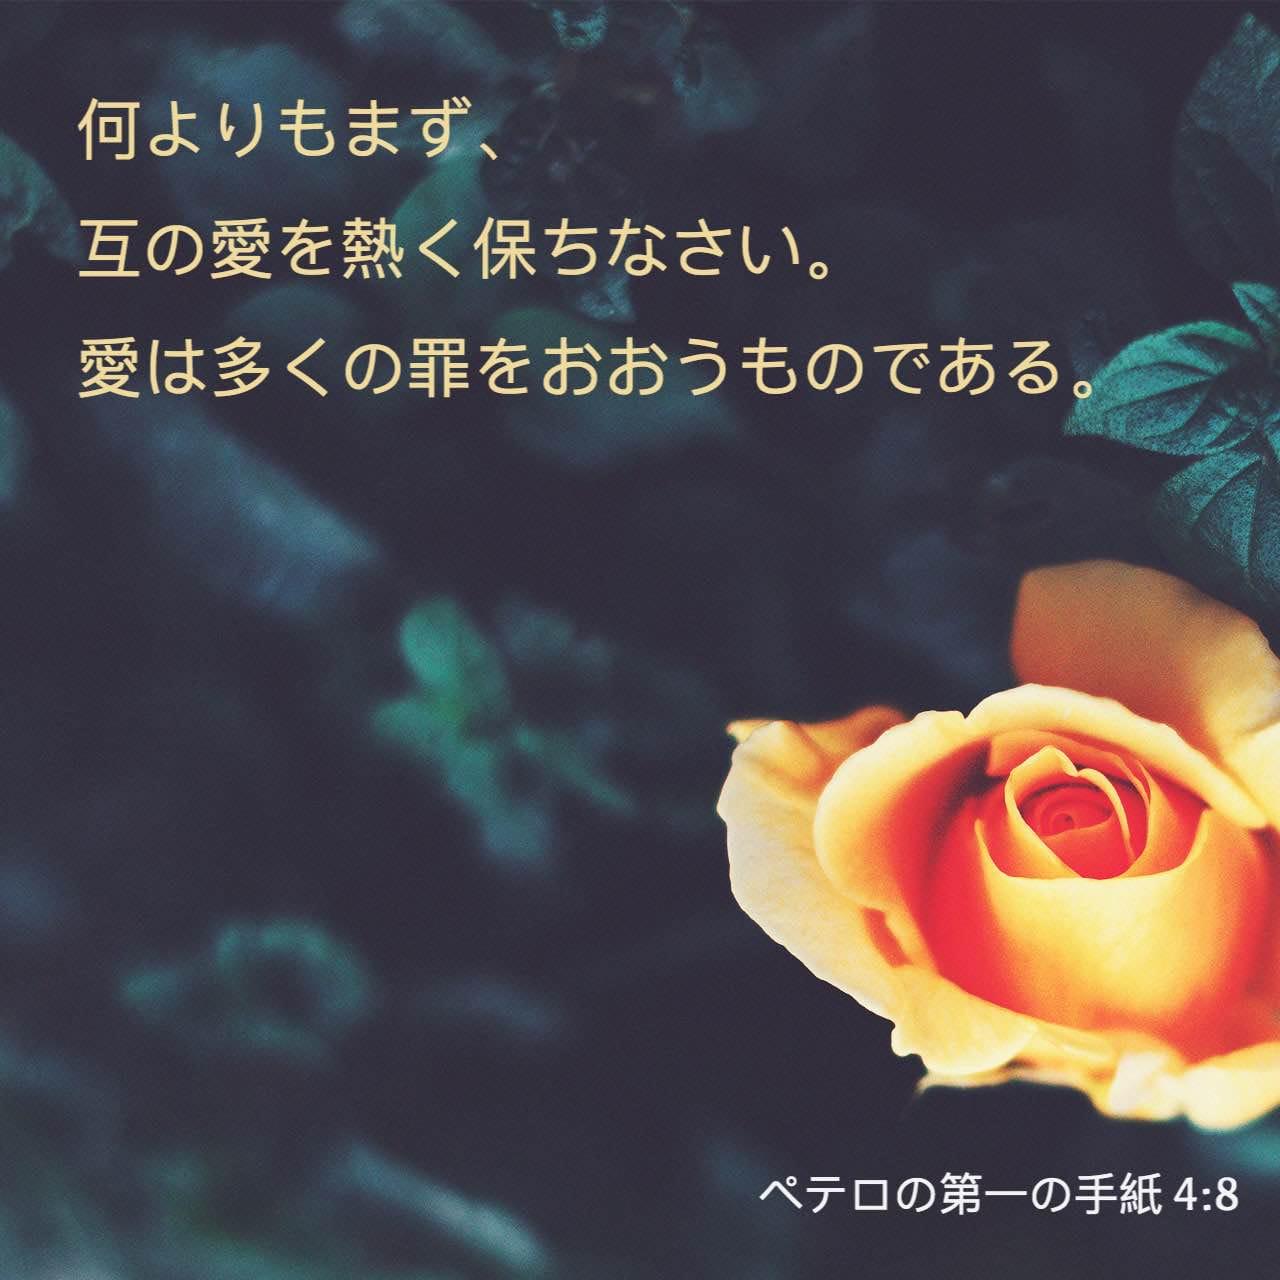 Bible Verse of the Day - day 85 - image 37348 (ペトロの手紙一 4:8)